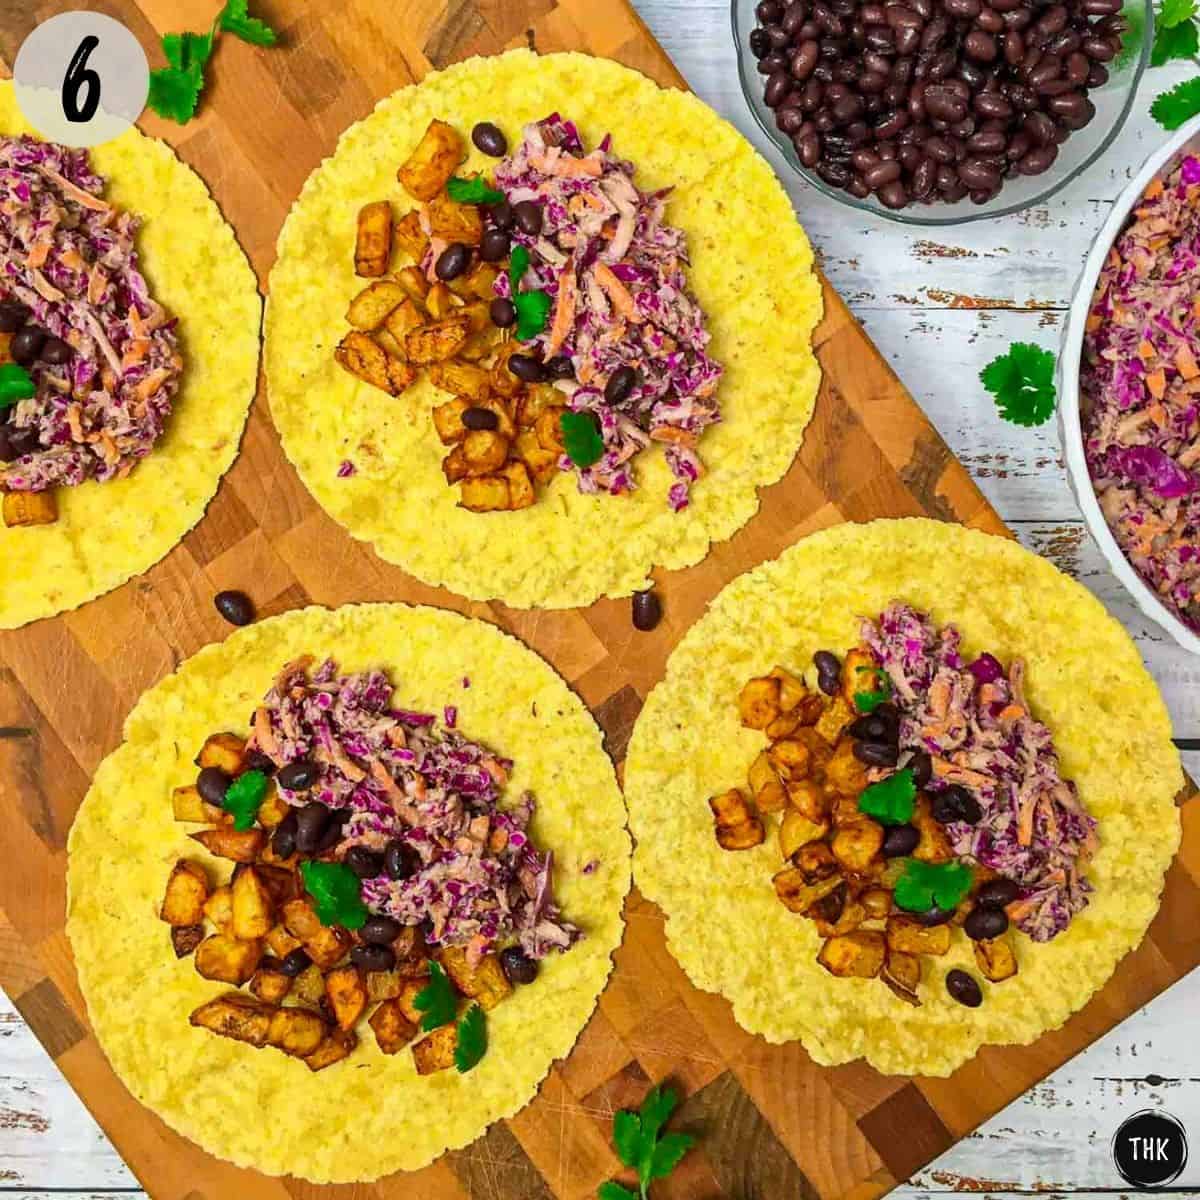 Four open corn tortillas with potatoes, black beans, coleslaw and cilantro on top.